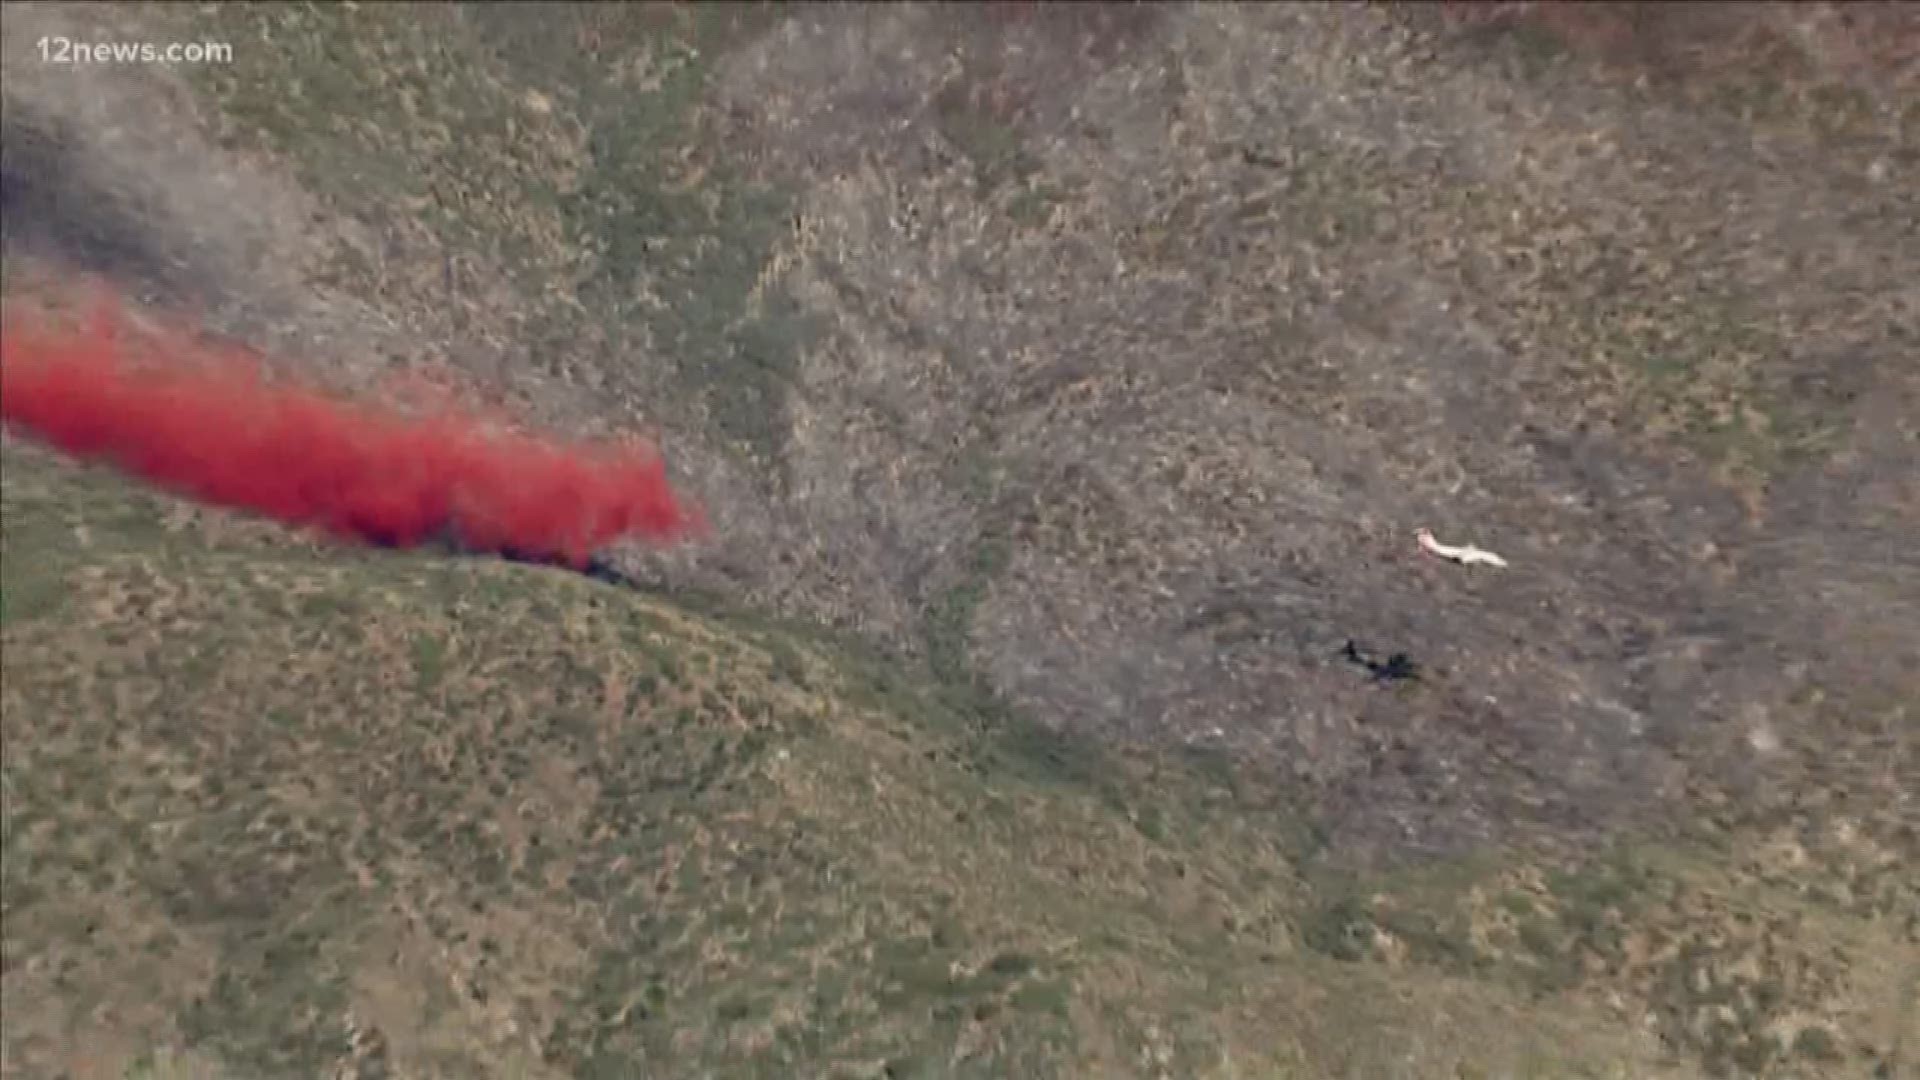 There is no immediate threat to structures, wildfire officials say.